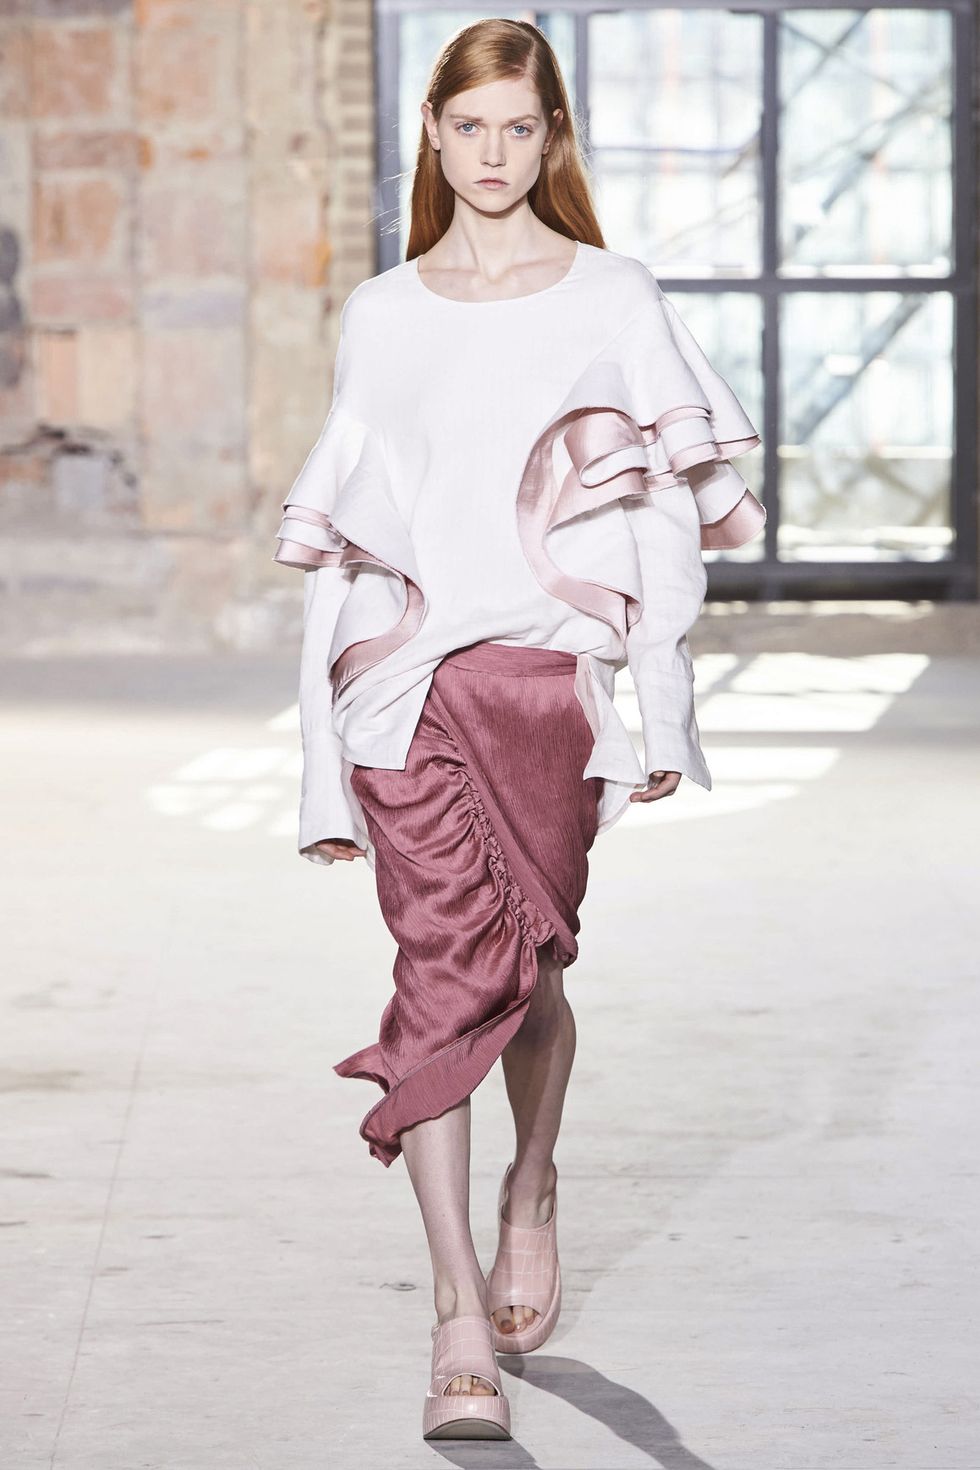 <p>Dries Van Noten's former design director, <span>Sander Lak&nbsp;</span><span>debuted&nbsp;his&nbsp;</span><span>Sies Marjan&nbsp;</span><span>label for fall 2016, and gave &nbsp;many a reason to wear color.</span></p>